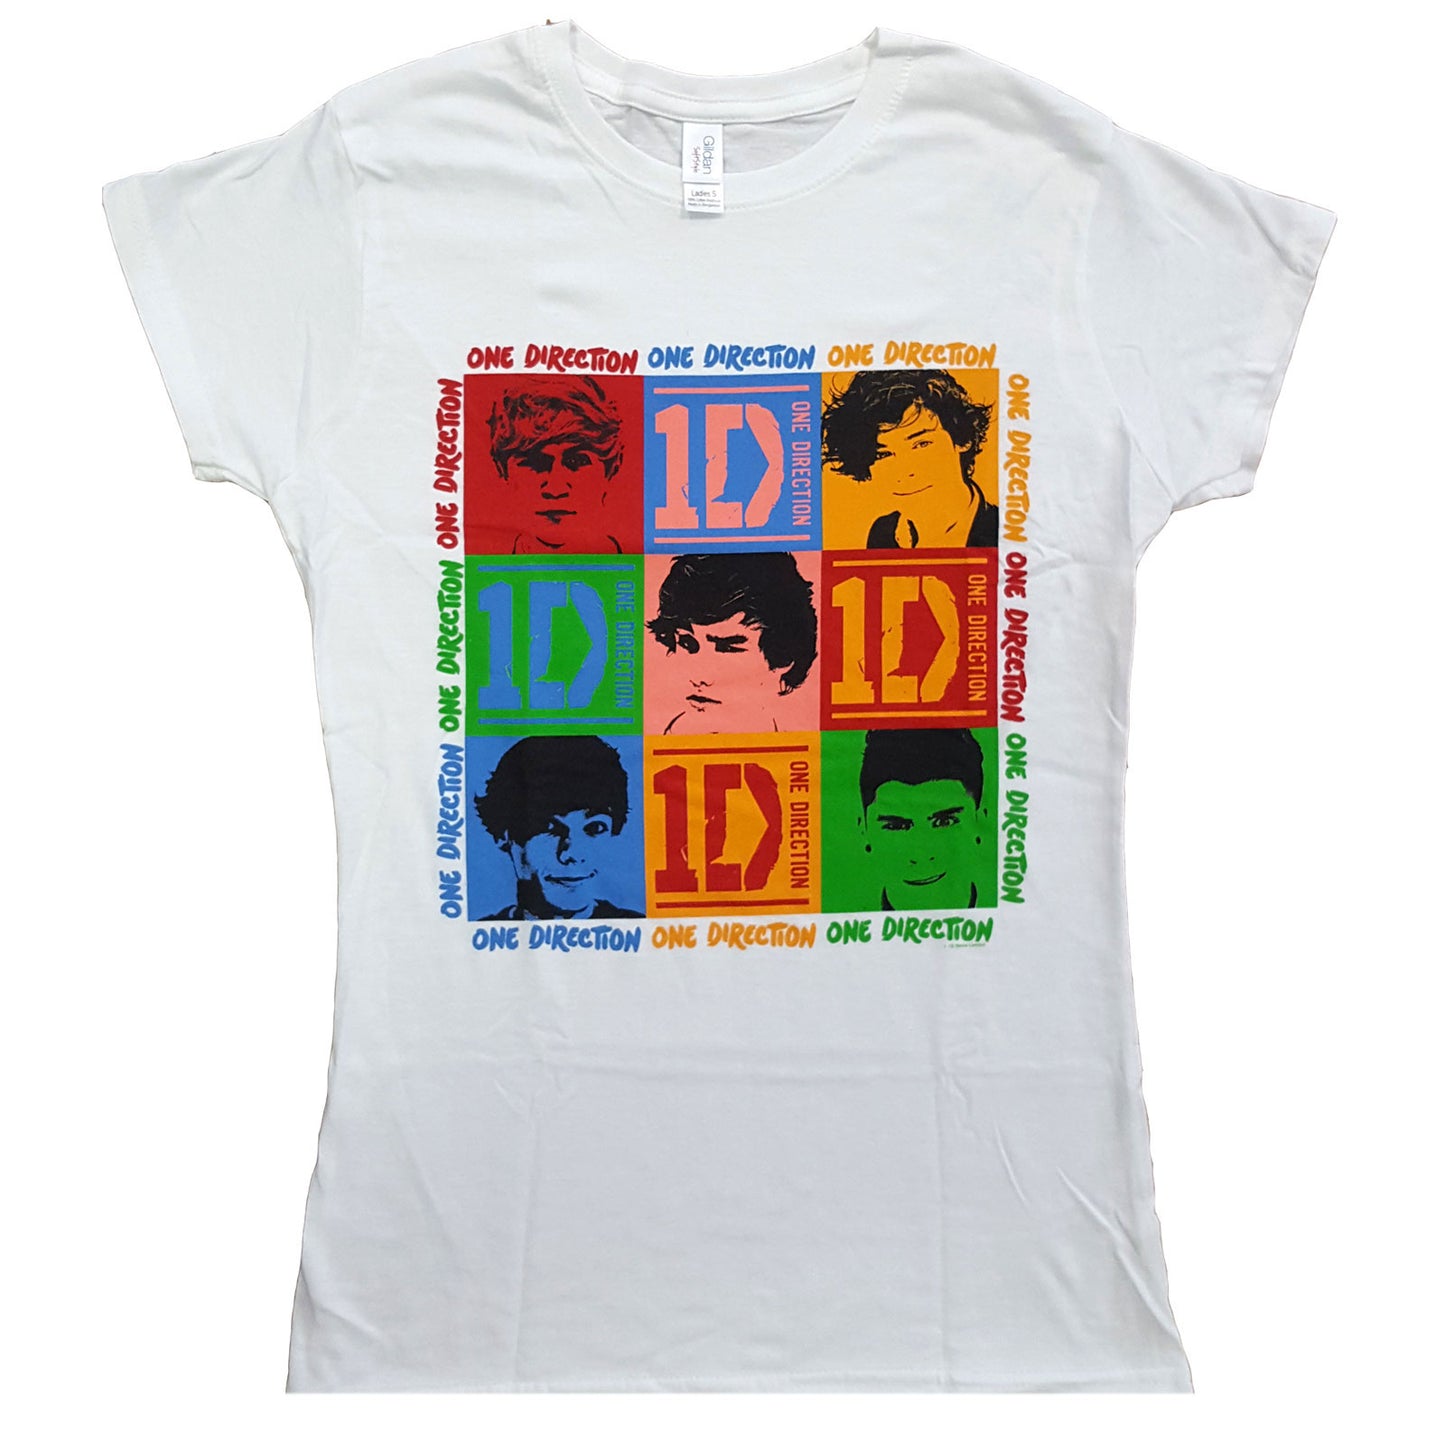 One Direction Ladies T-Shirt: 9 Squares (Skinny Fit)